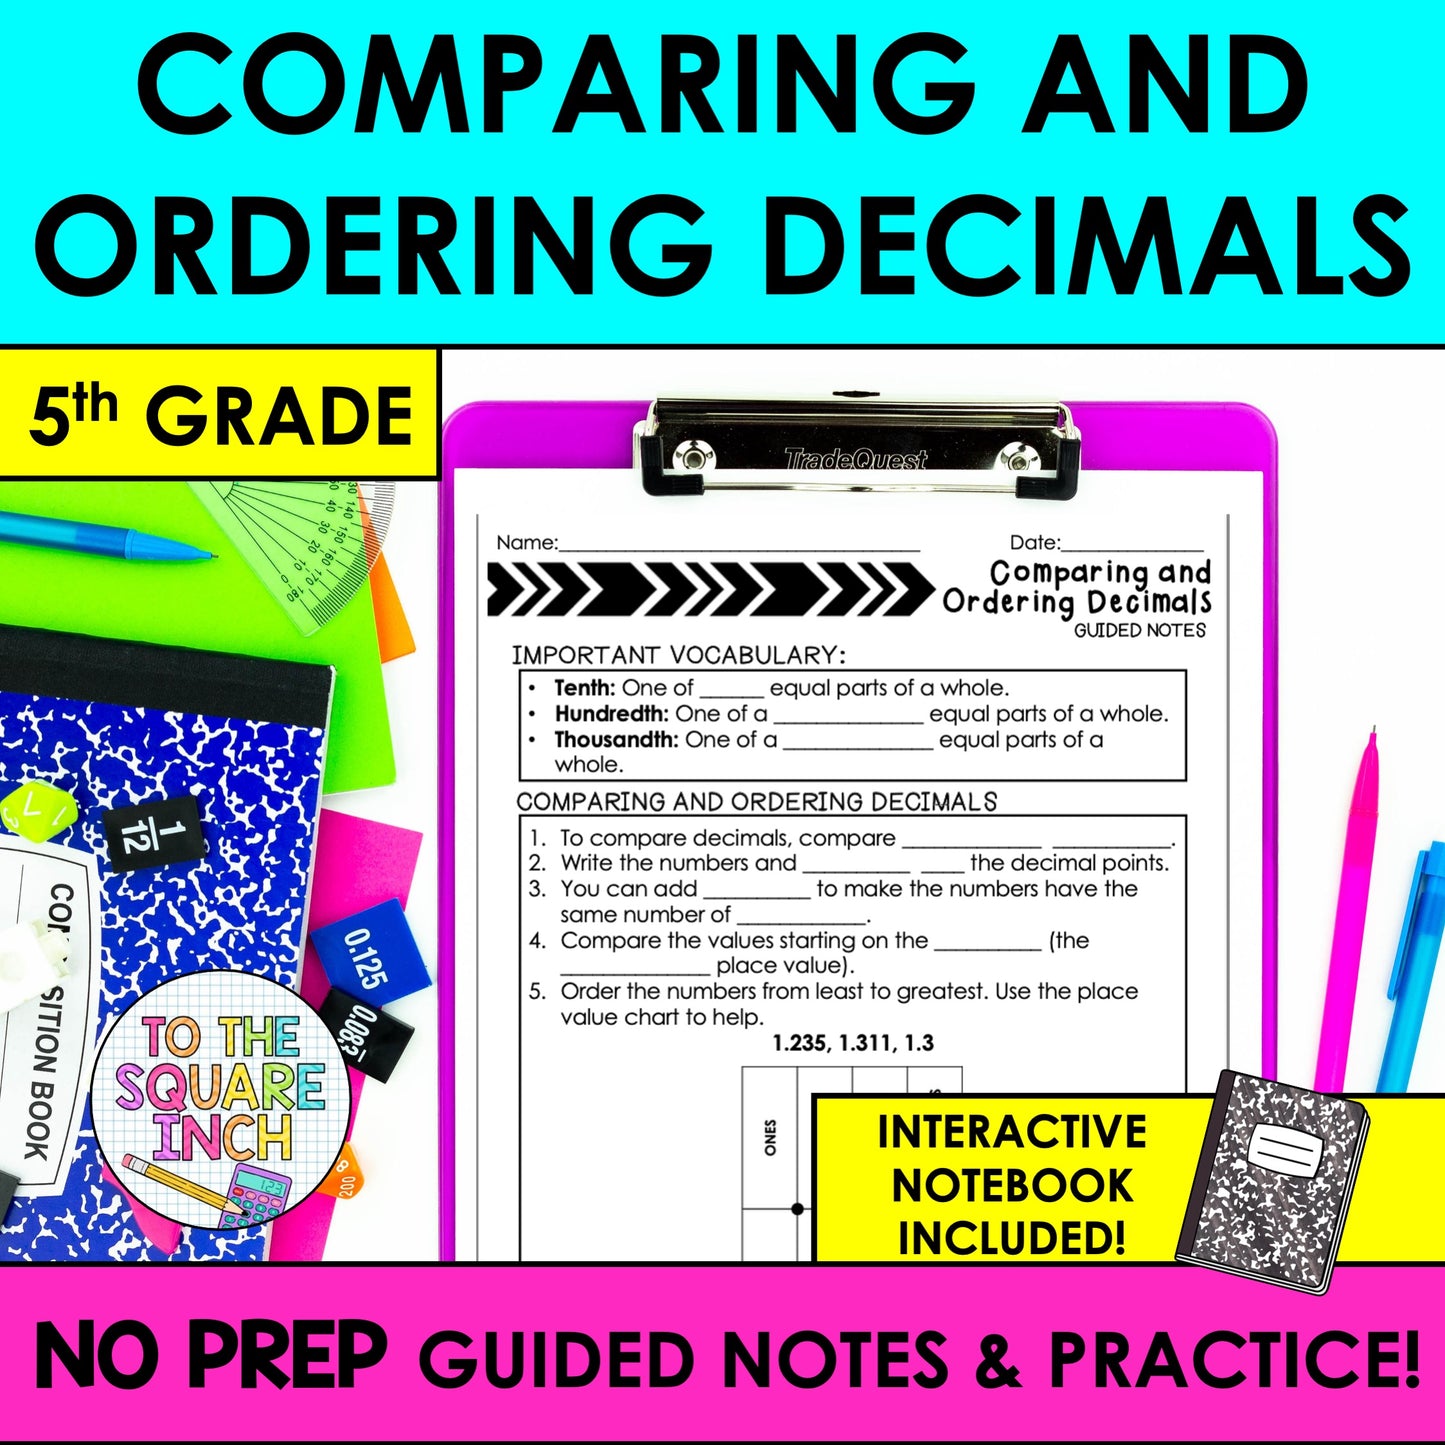 Comparing and Ordering Decimals Notes